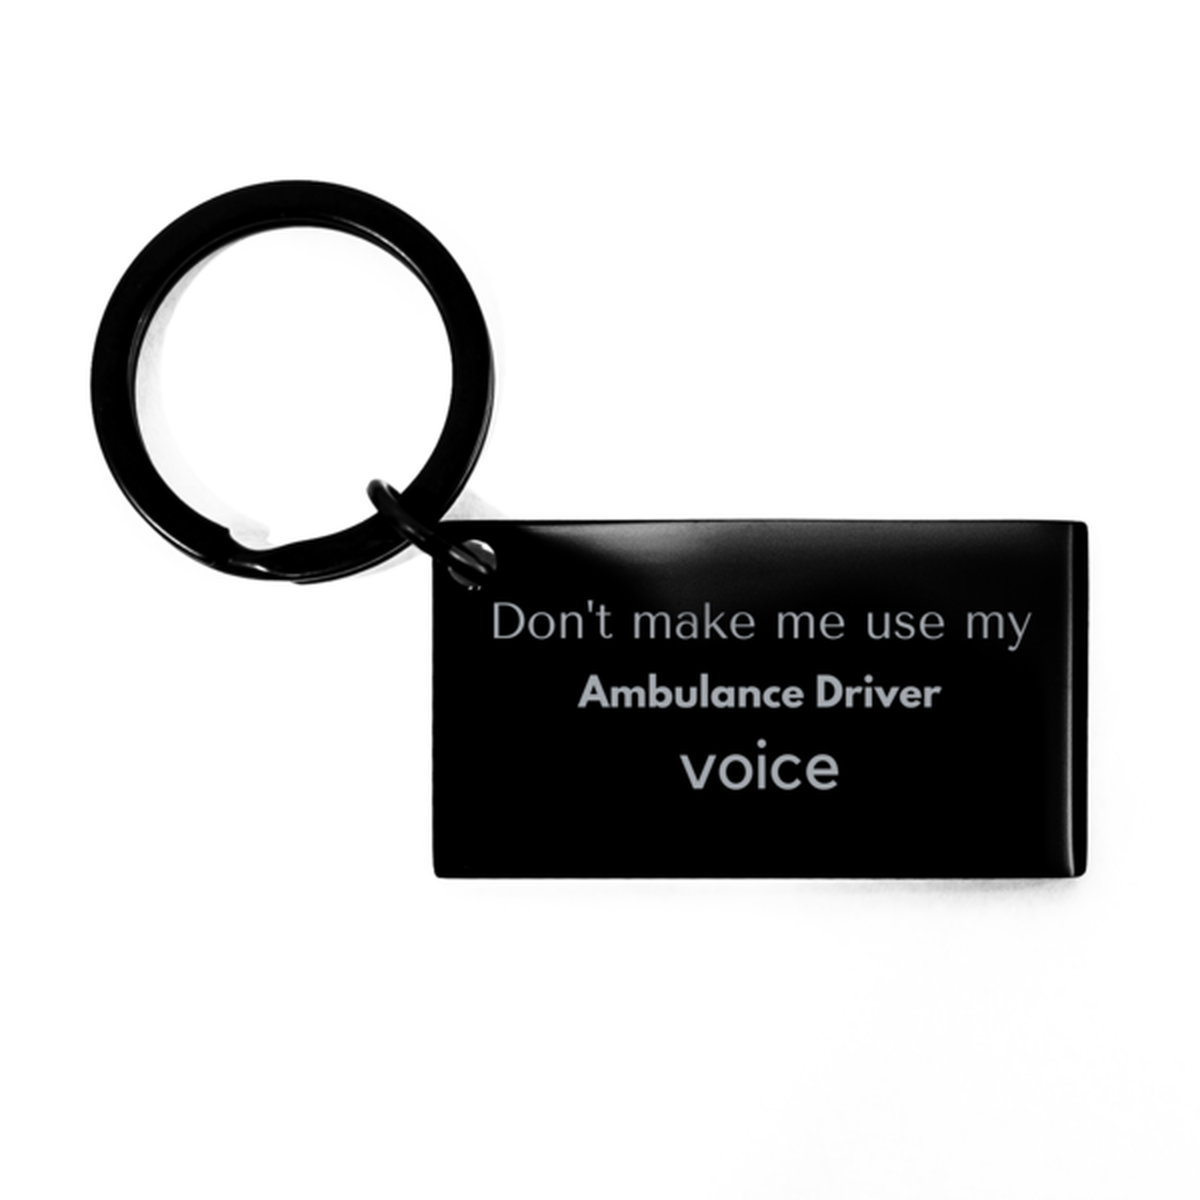 Don't make me use my Ambulance Driver voice, Sarcasm Ambulance Driver Gifts, Christmas Ambulance Driver Keychain Birthday Unique Gifts For Ambulance Driver Coworkers, Men, Women, Colleague, Friends